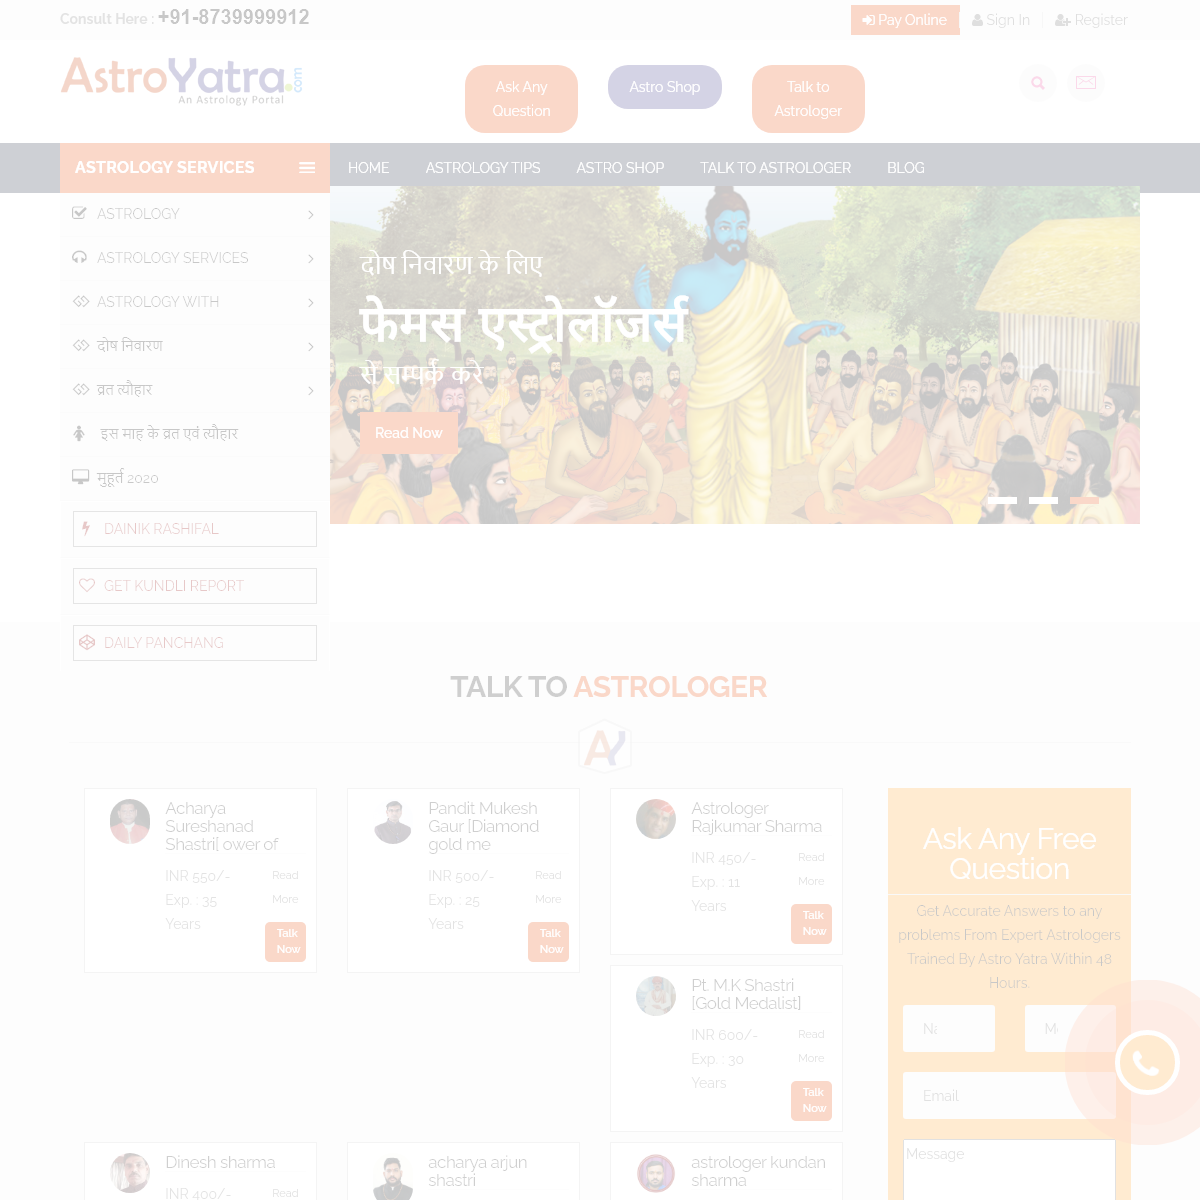 A complete backup of astroyatra.com